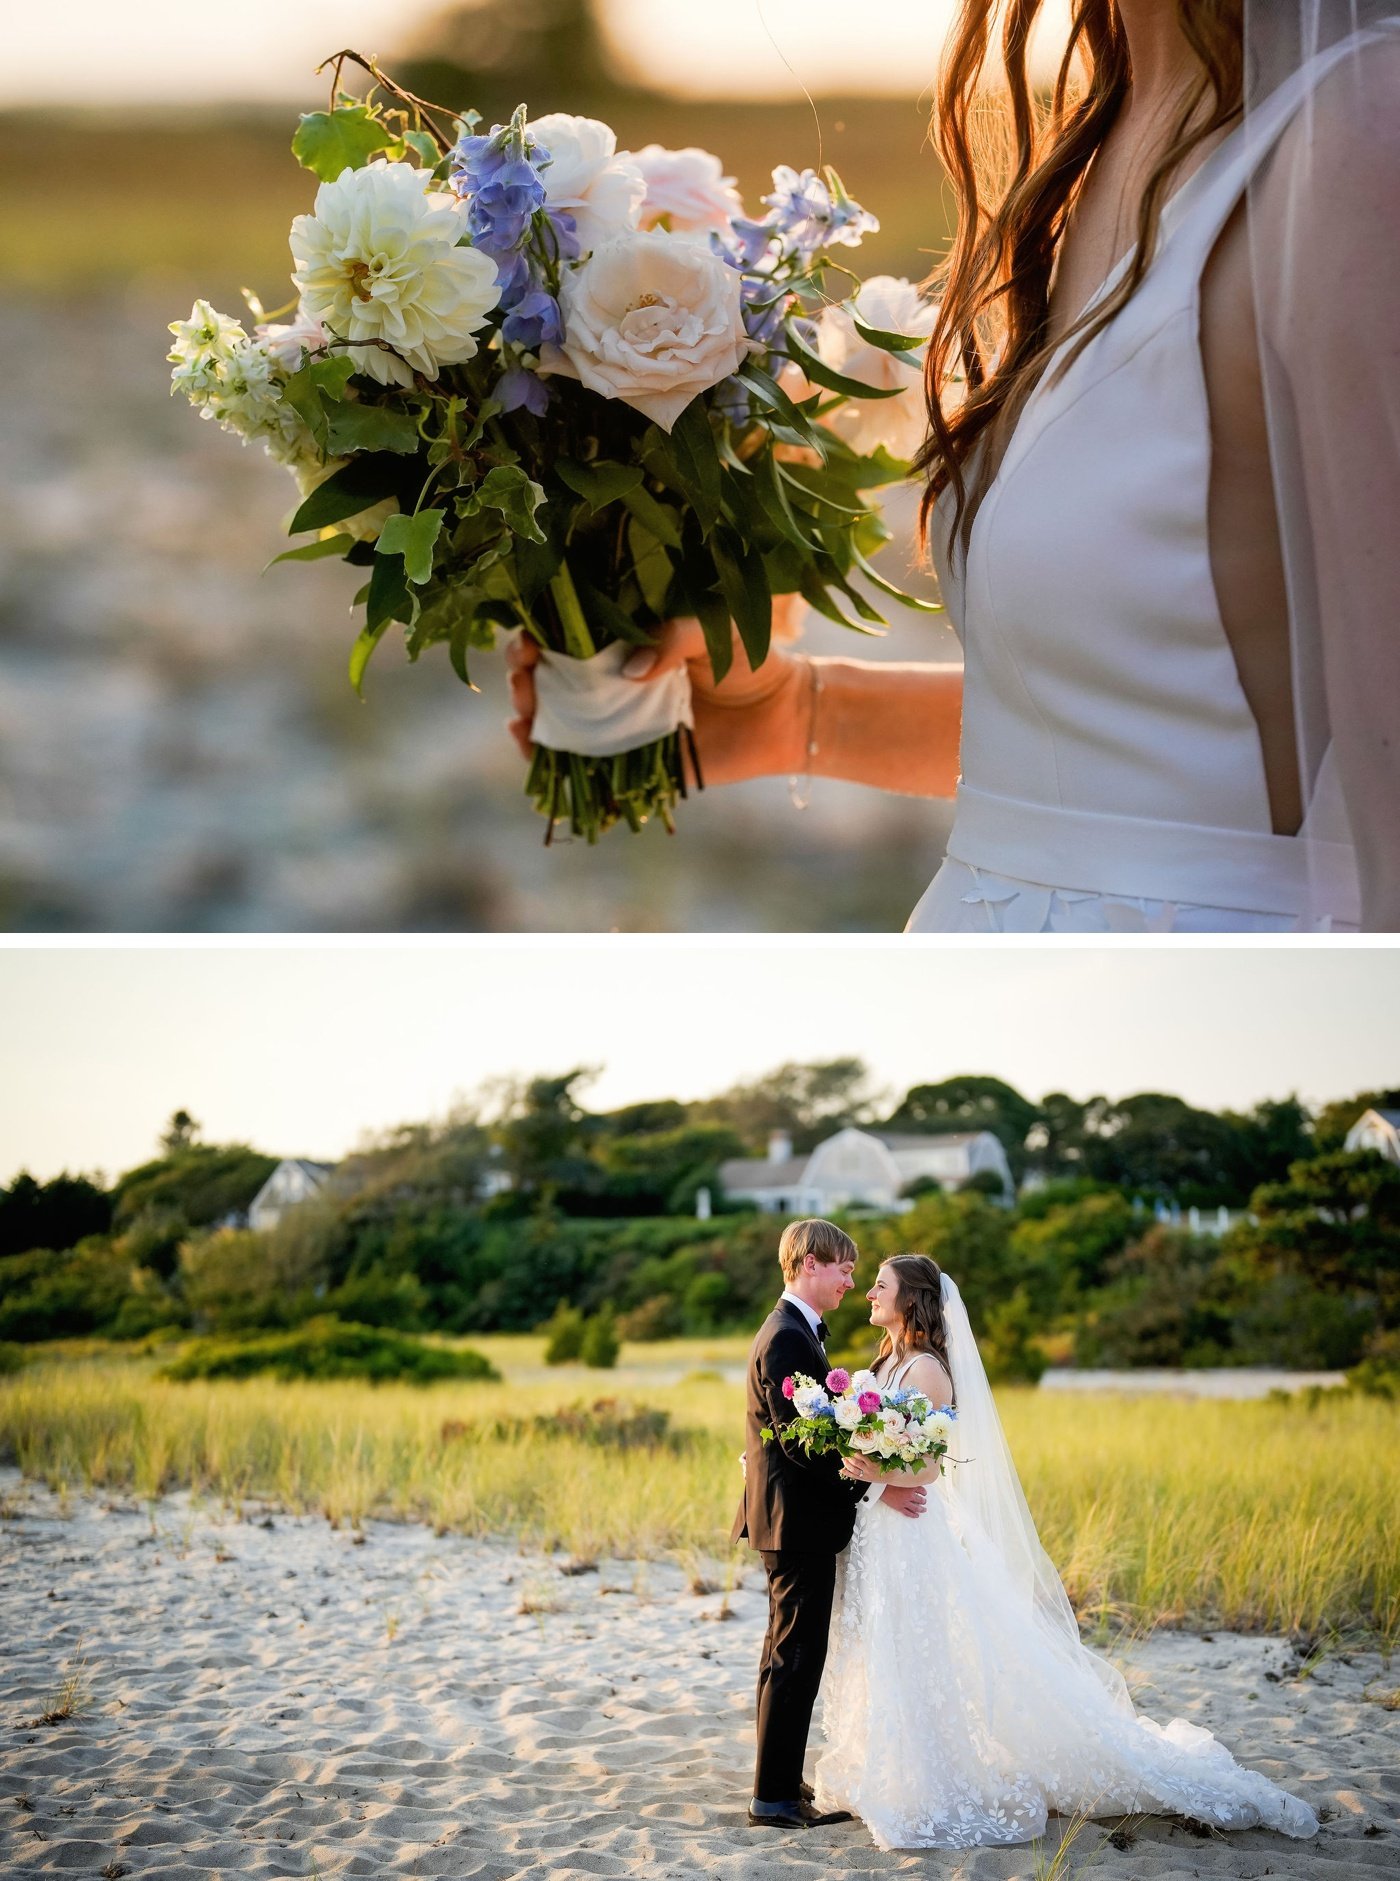 A bridal bouquet filled with white roses, pink dahlias, and blue delphinium by Botanique of Cape Cod